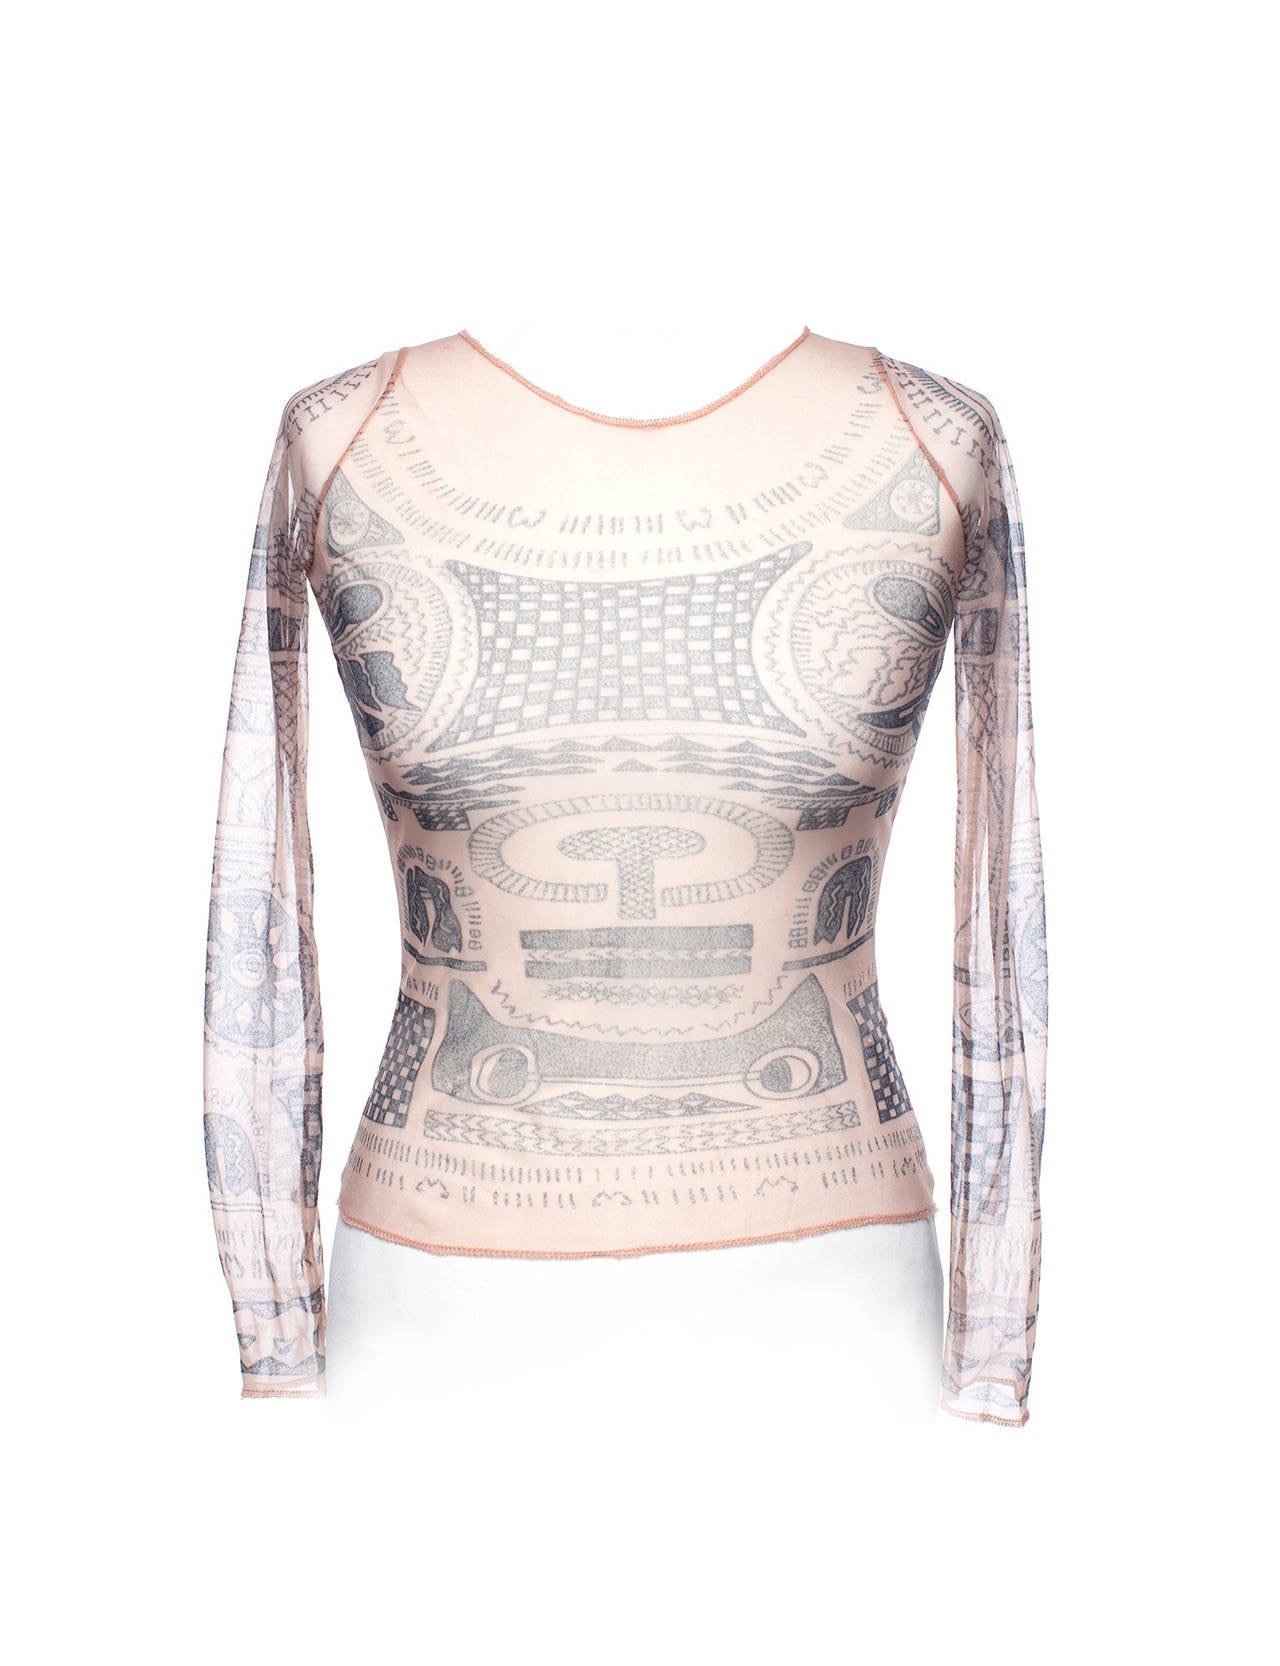 Top is printed with the now iconic tattoo print in polyamide stretch mesh. This top was meant as a layering piece to give the iilluson of body tattoo's. This item is from the very first collection from MMM and is now a replica statement fron the